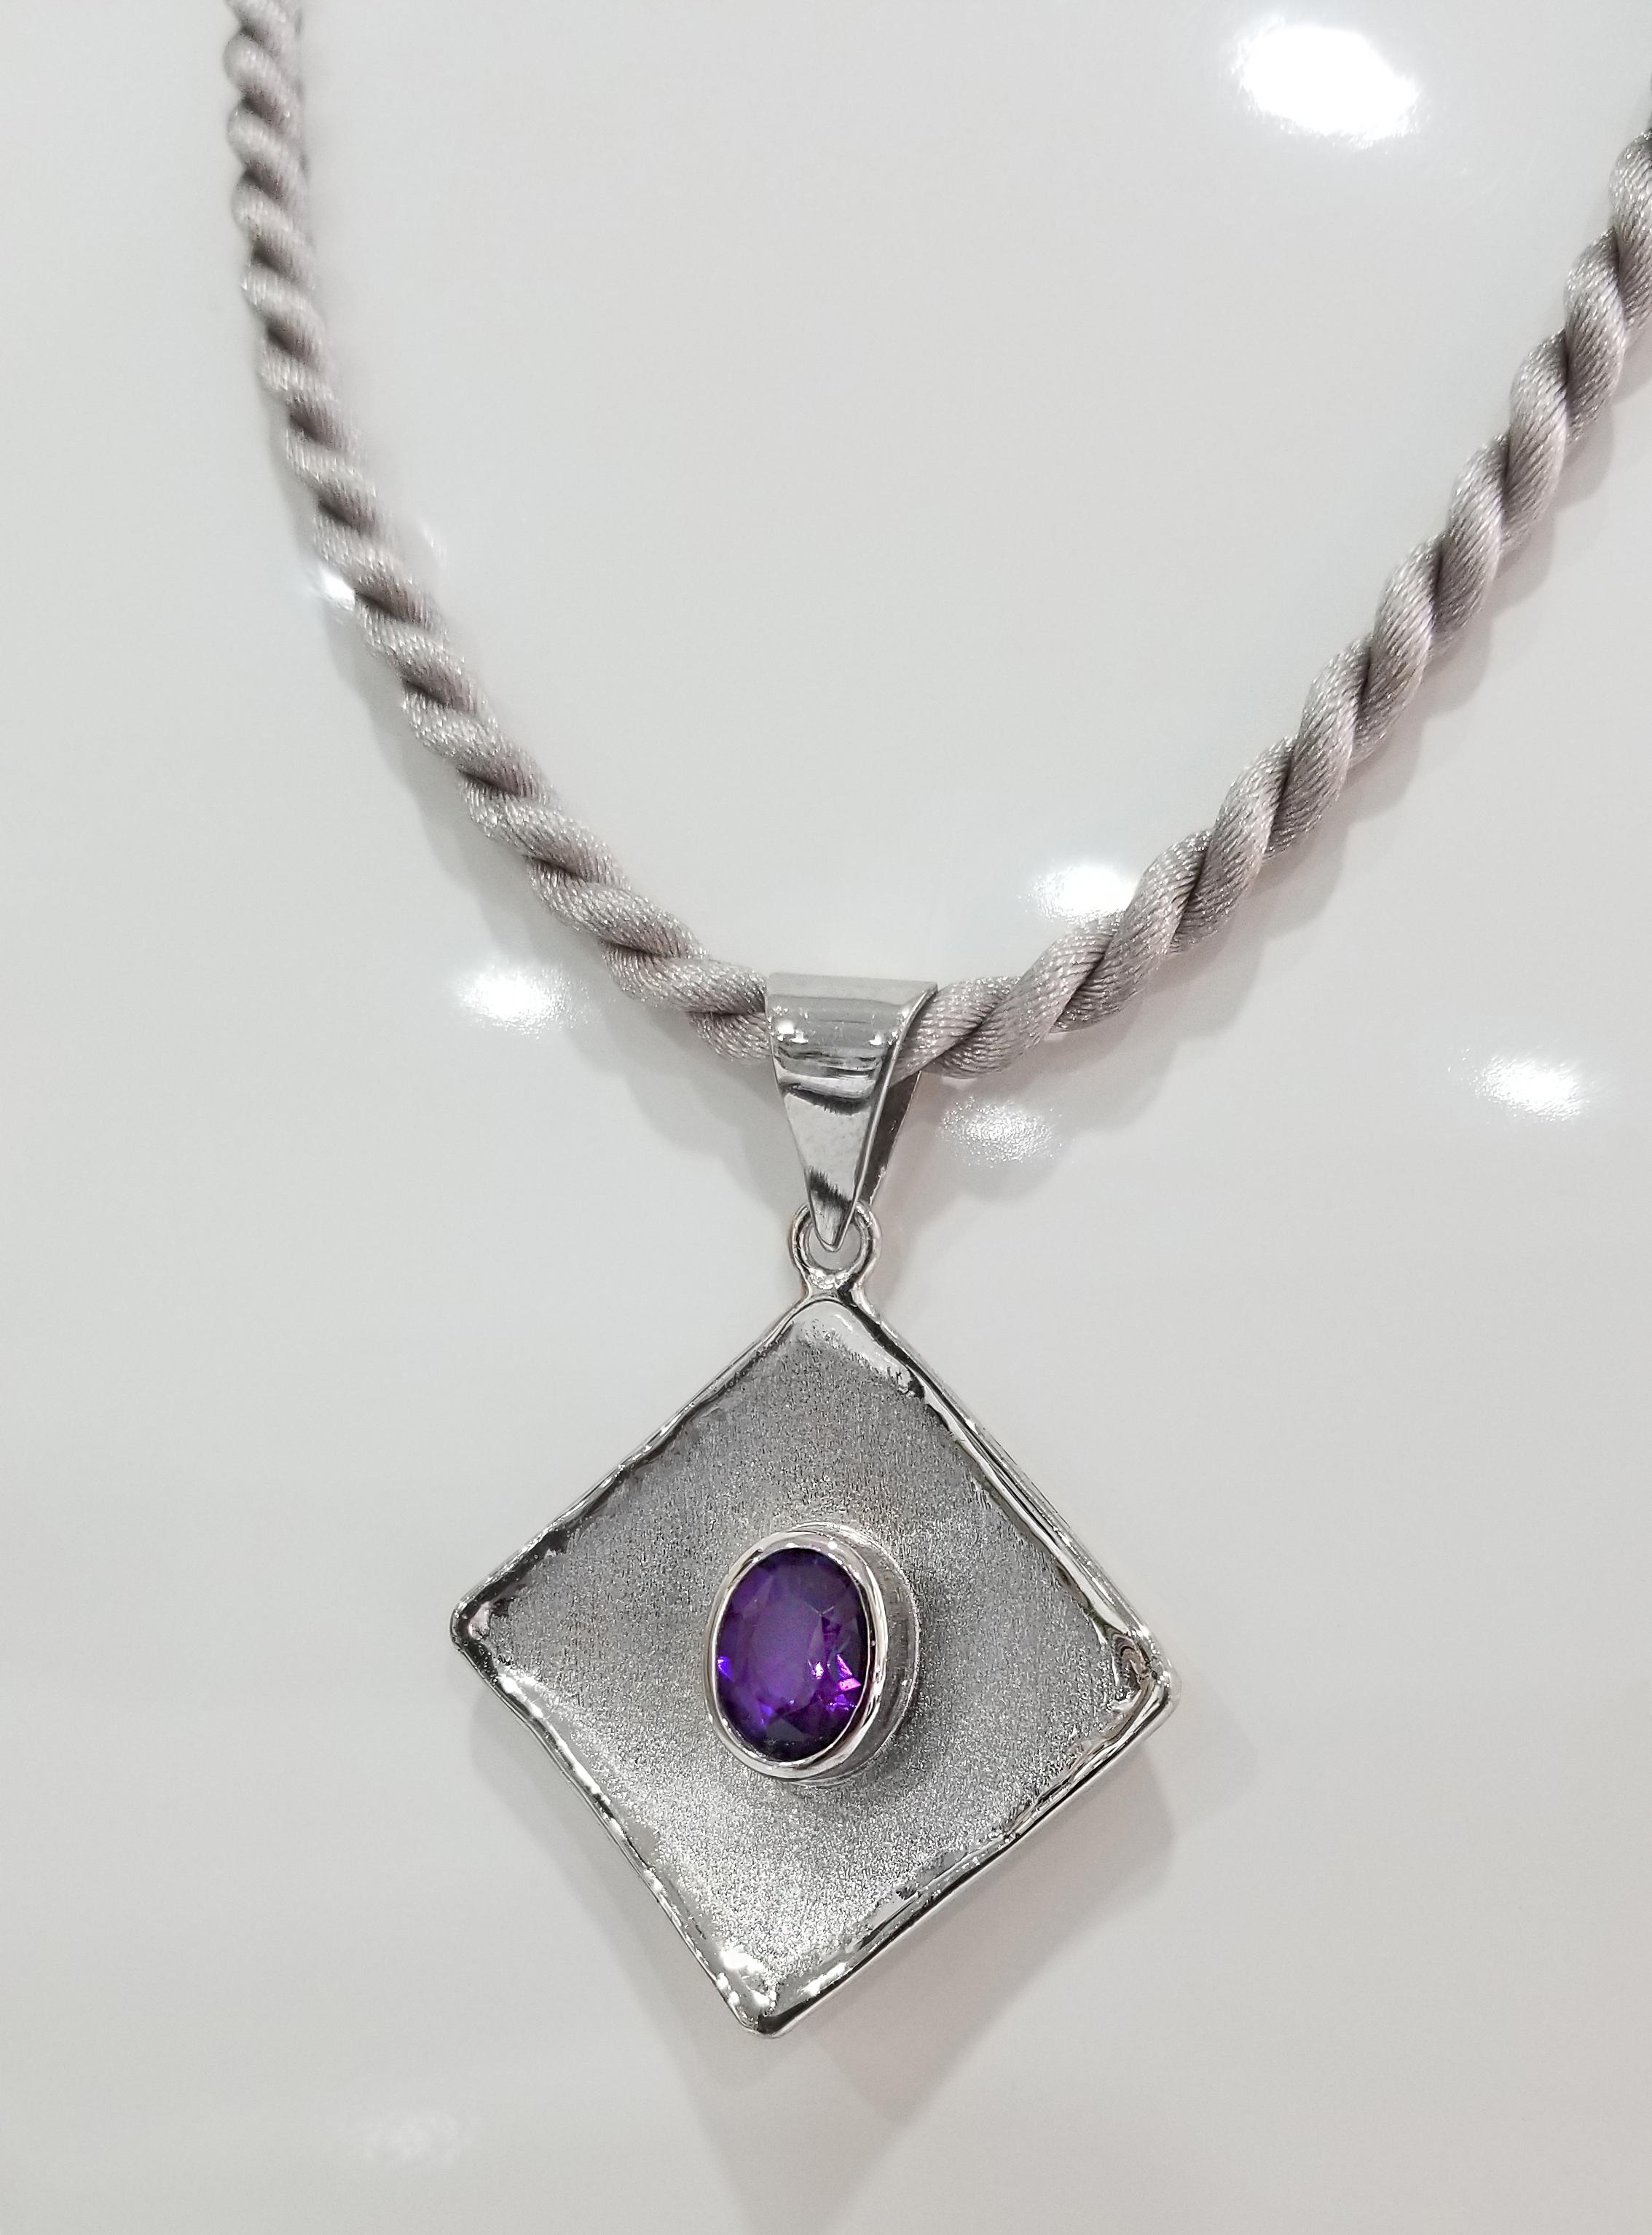 Yianni Creations Ammos Collection 100% Handmade Artisan Pendant from Fine Silver featuring 1.75 Carat Oval Cut Amethyst complemented by unique techniques of craftsmanship - brushed texture and nature-inspired liquid edges. The core of this beautiful